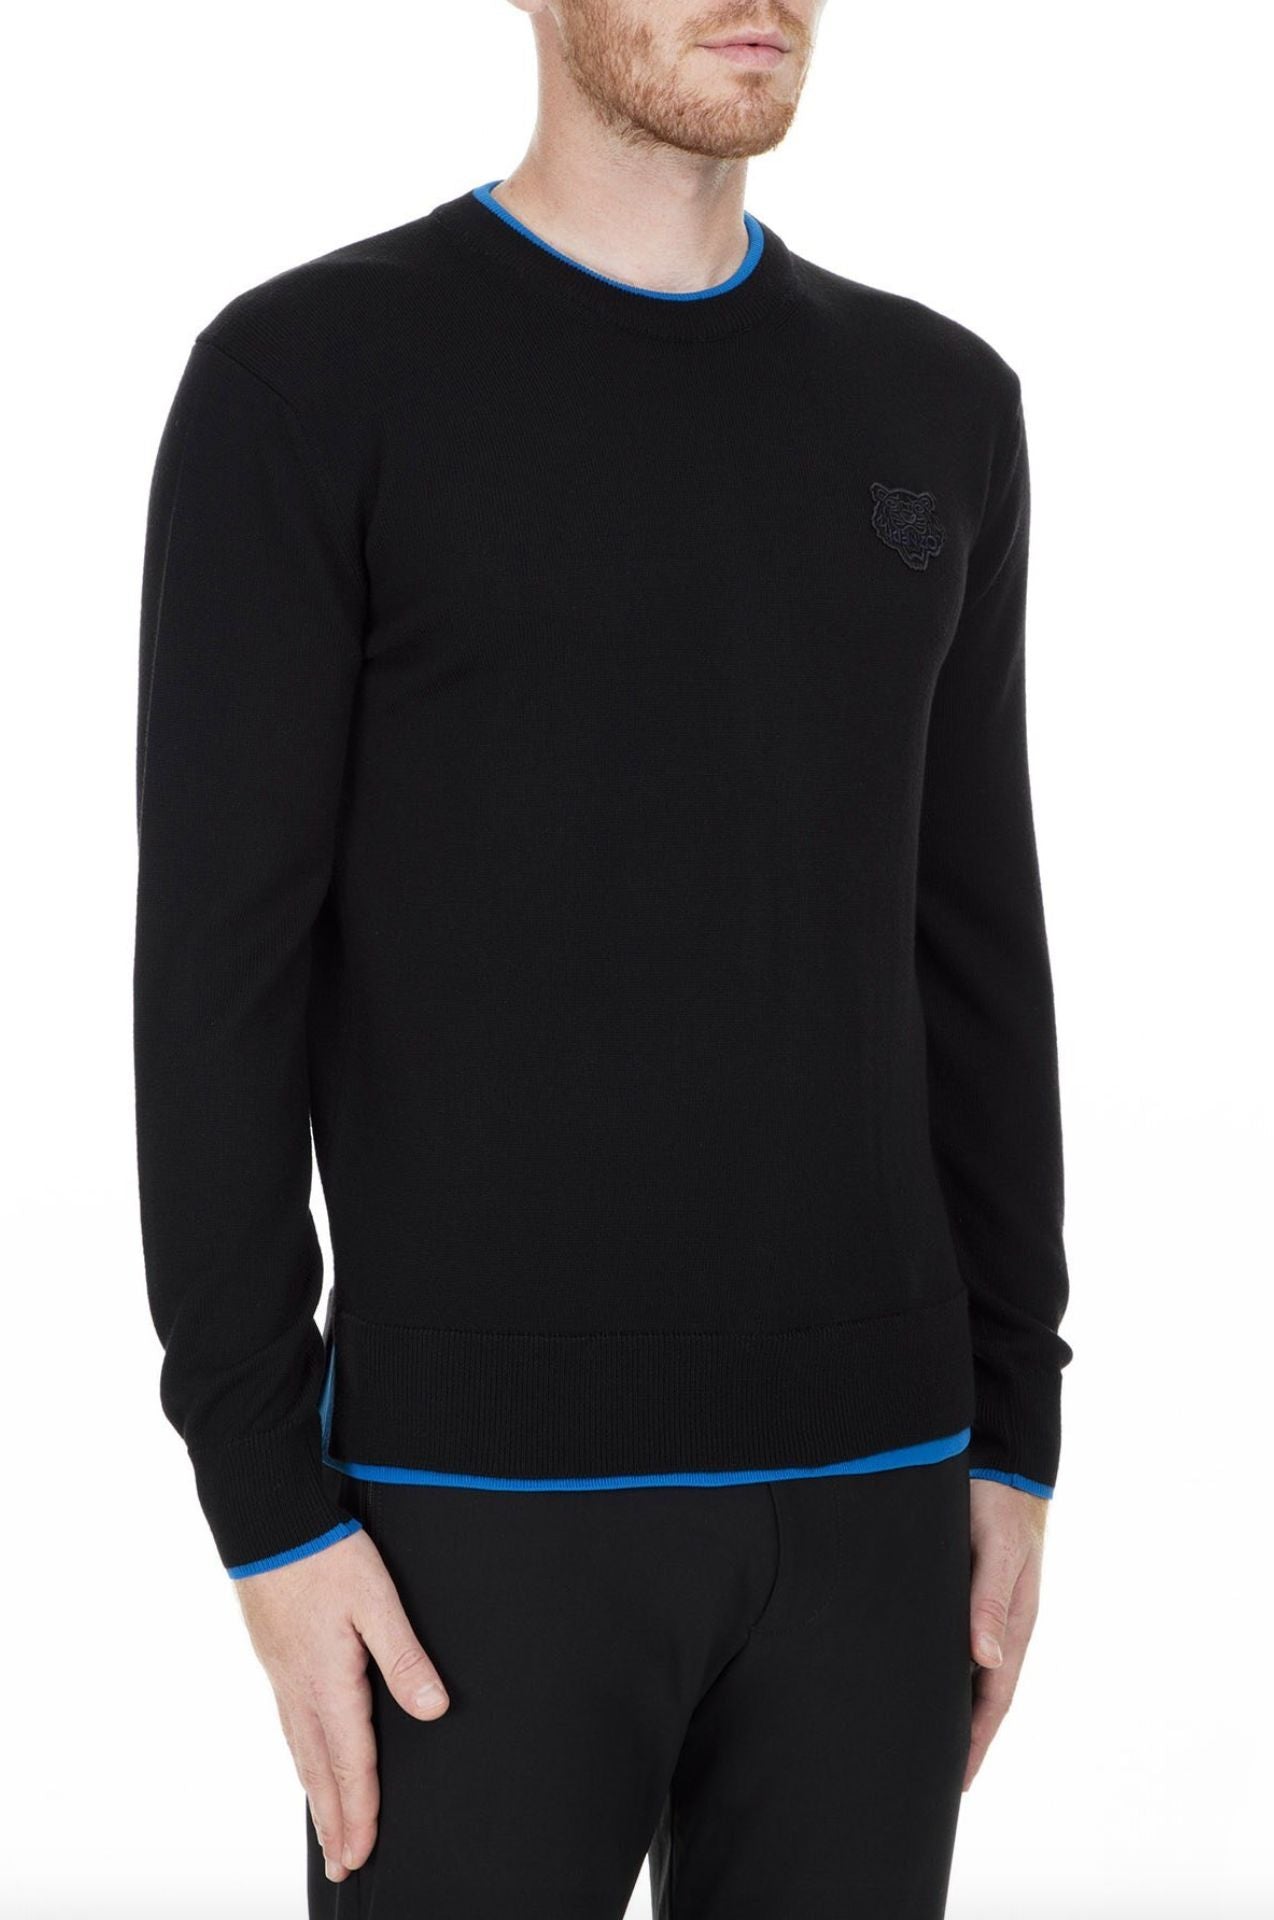 Sleek Black Roundneck Sweater with Blue Accents